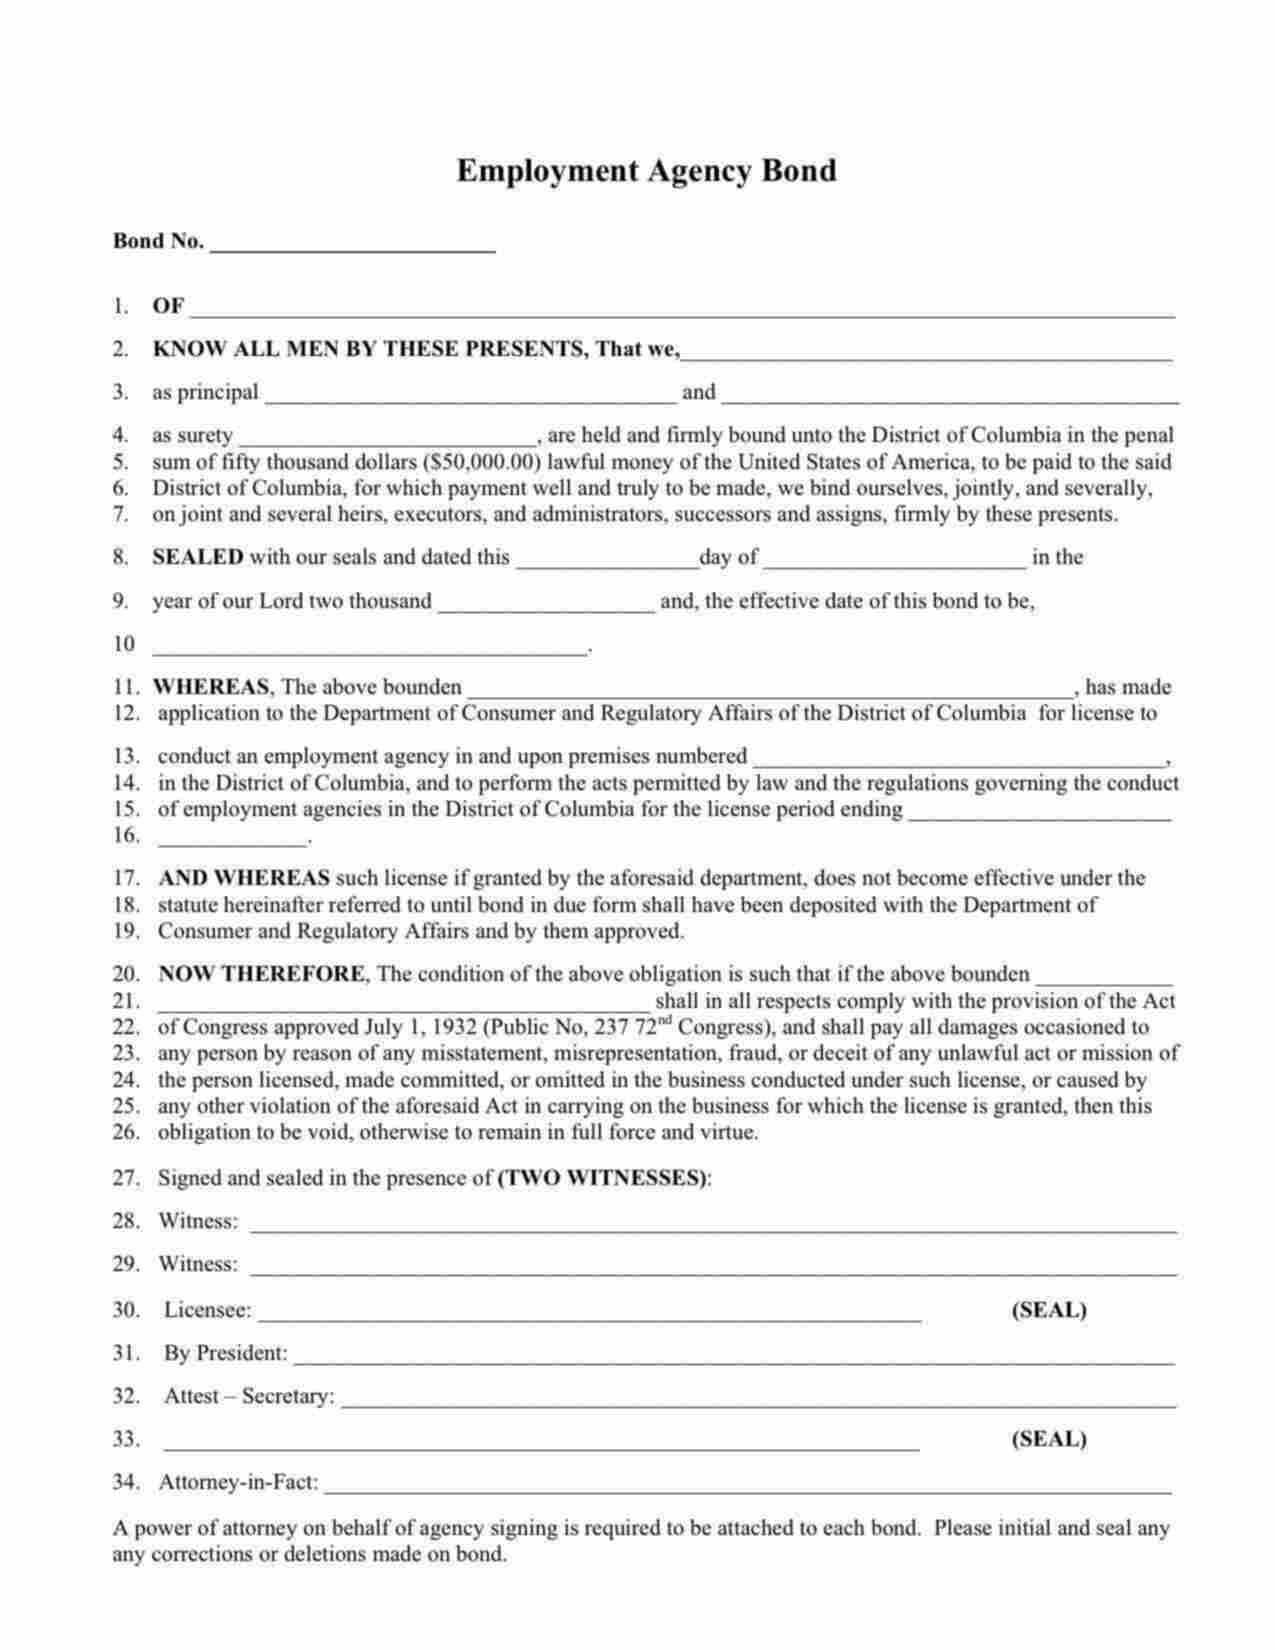 District of Columbia Employment Agency Bond Form